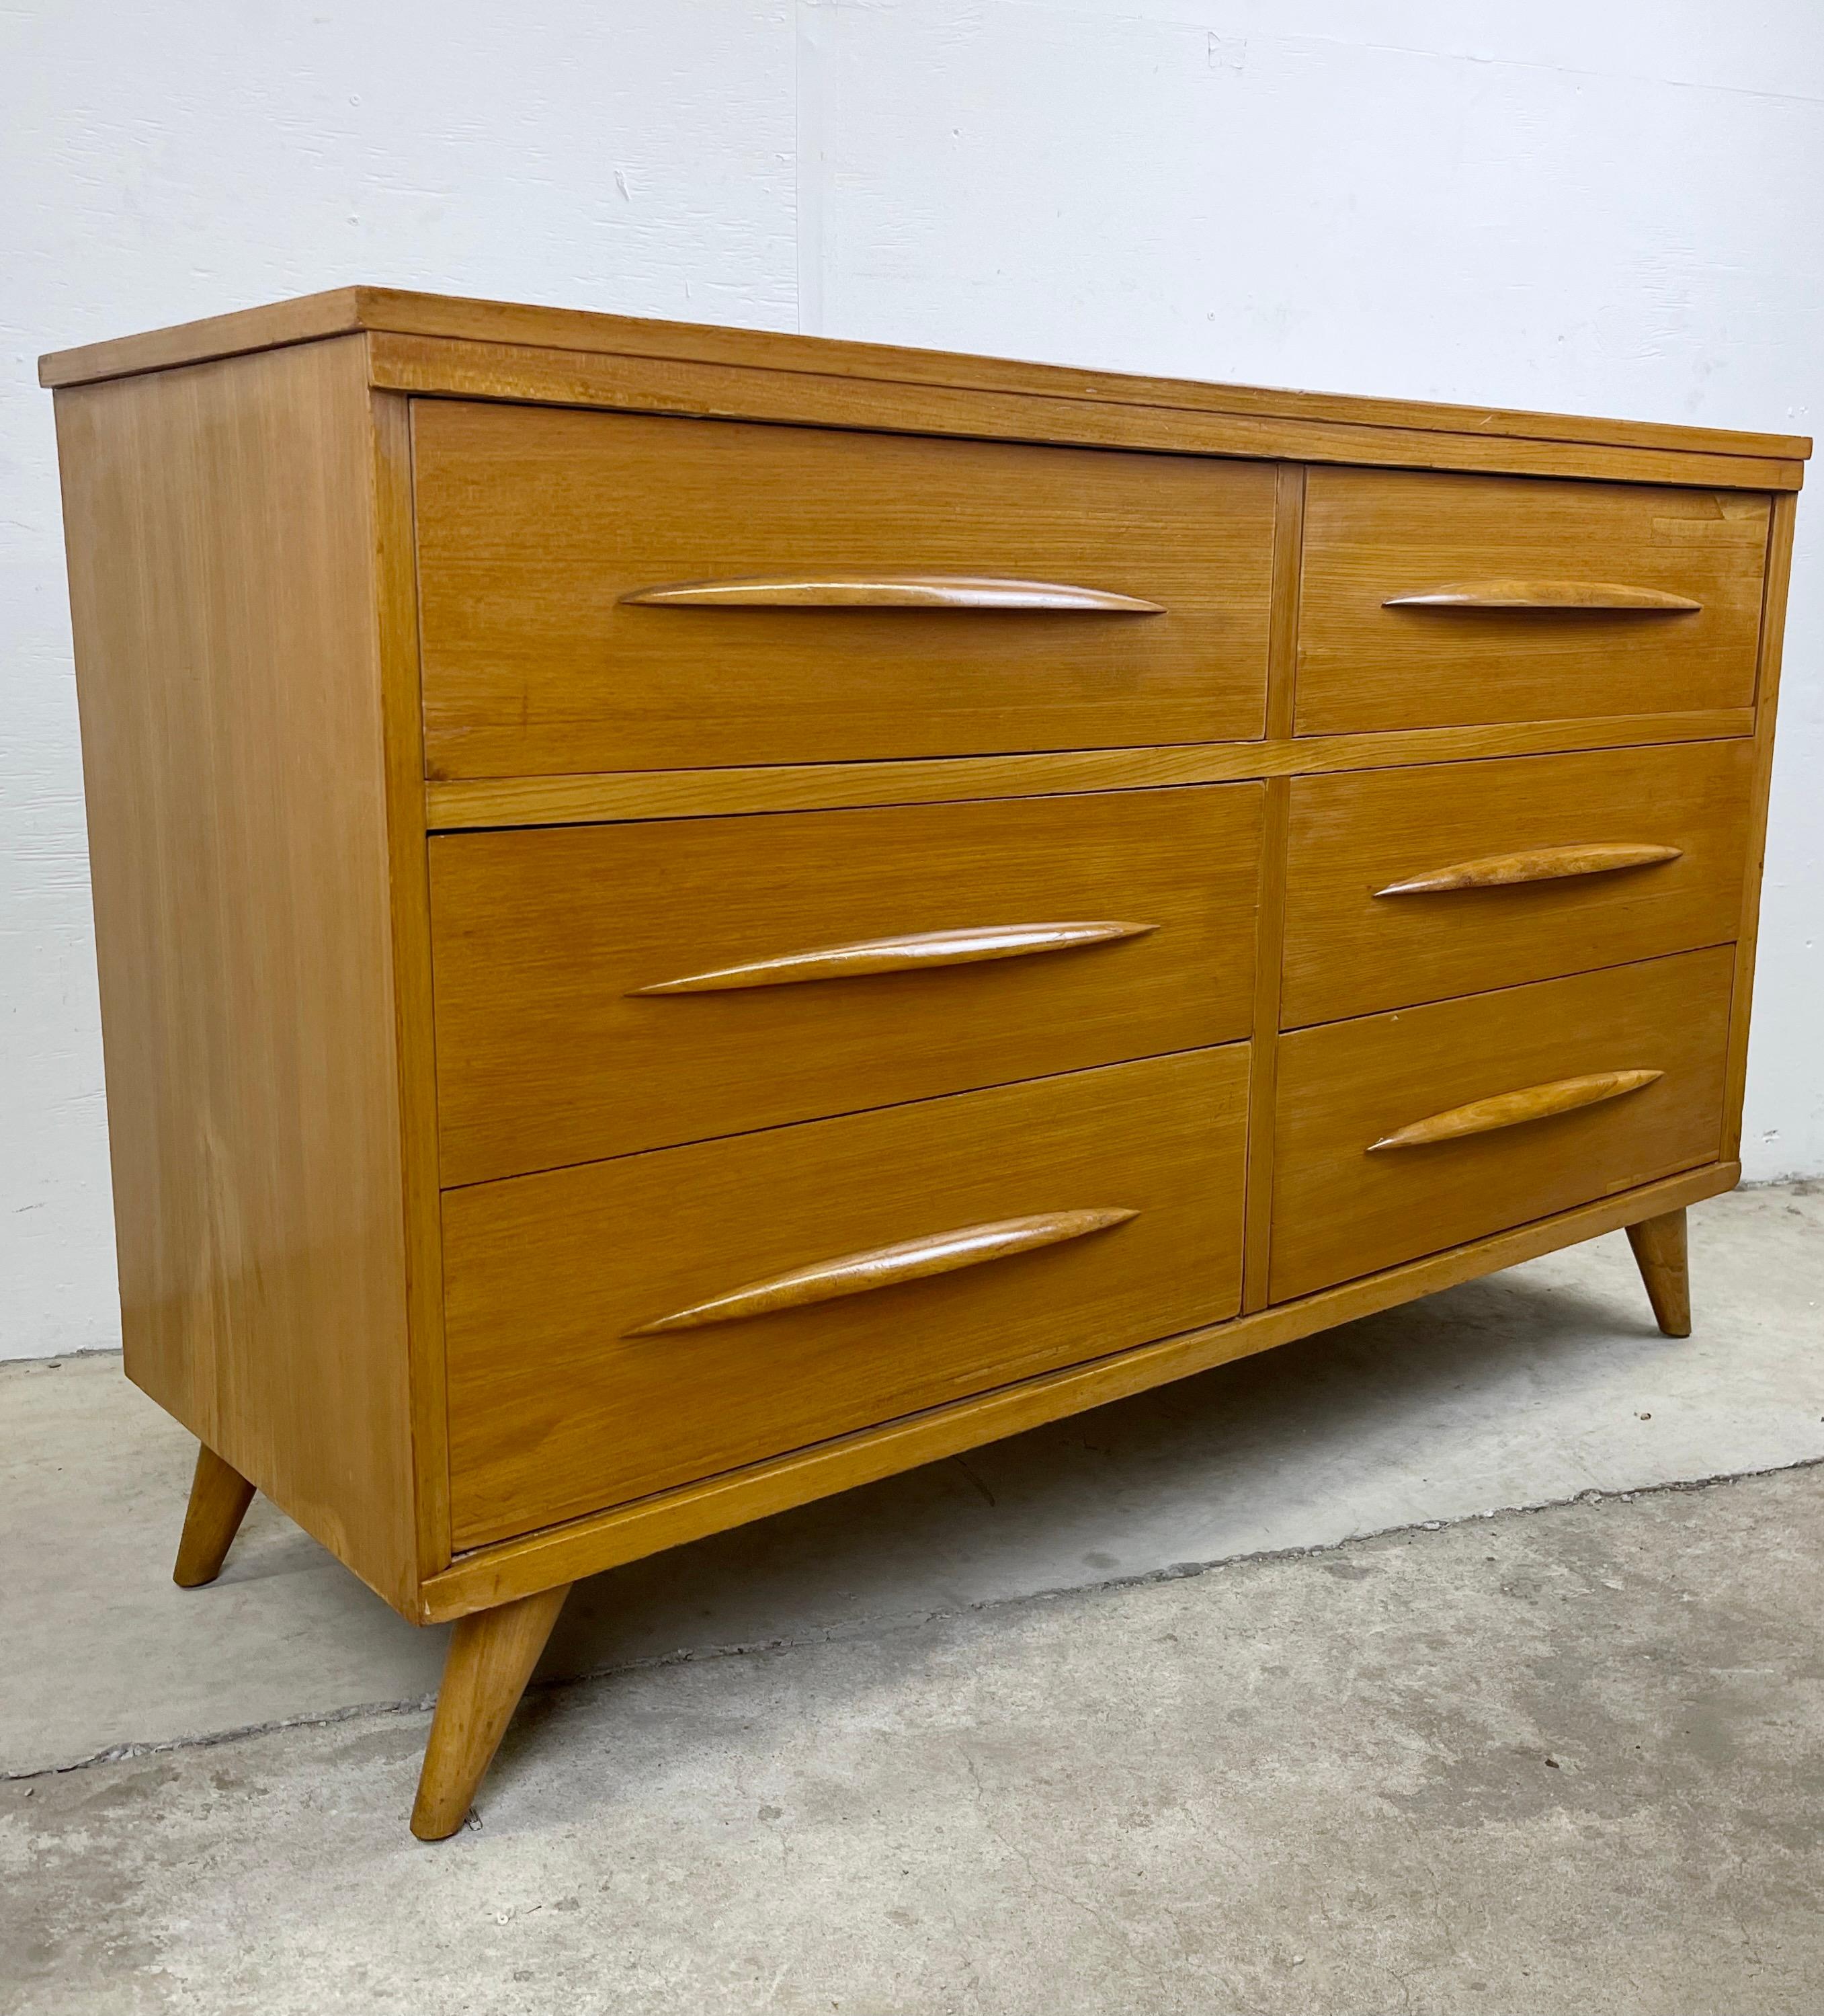 This impressive Mid-Century Modern six drawer dresser features a beautiful vintage blonde finish with unique pointed wooden drawer pulls. The quality vintage construction and mid-century modern design of this six drawer bedroom dresser make it the